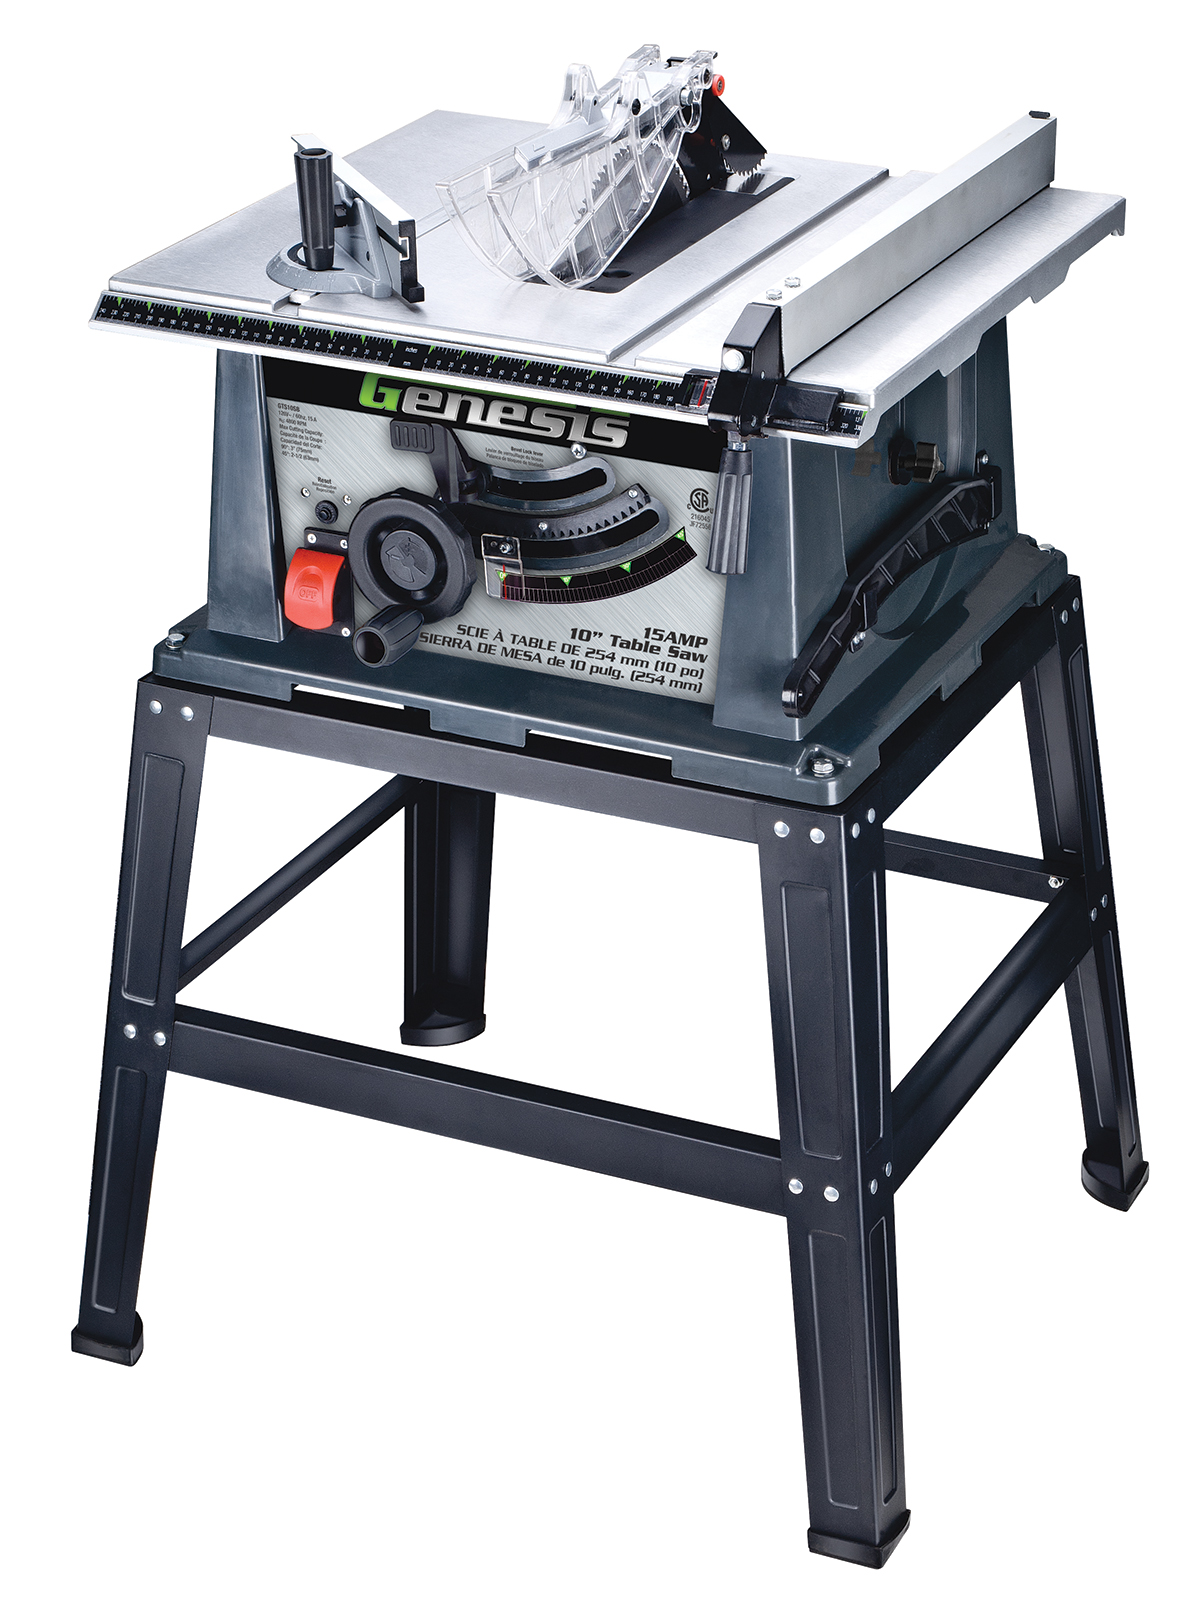 Genesis 10-Inch Table Saw With Stand, GTS10SB - image 1 of 5